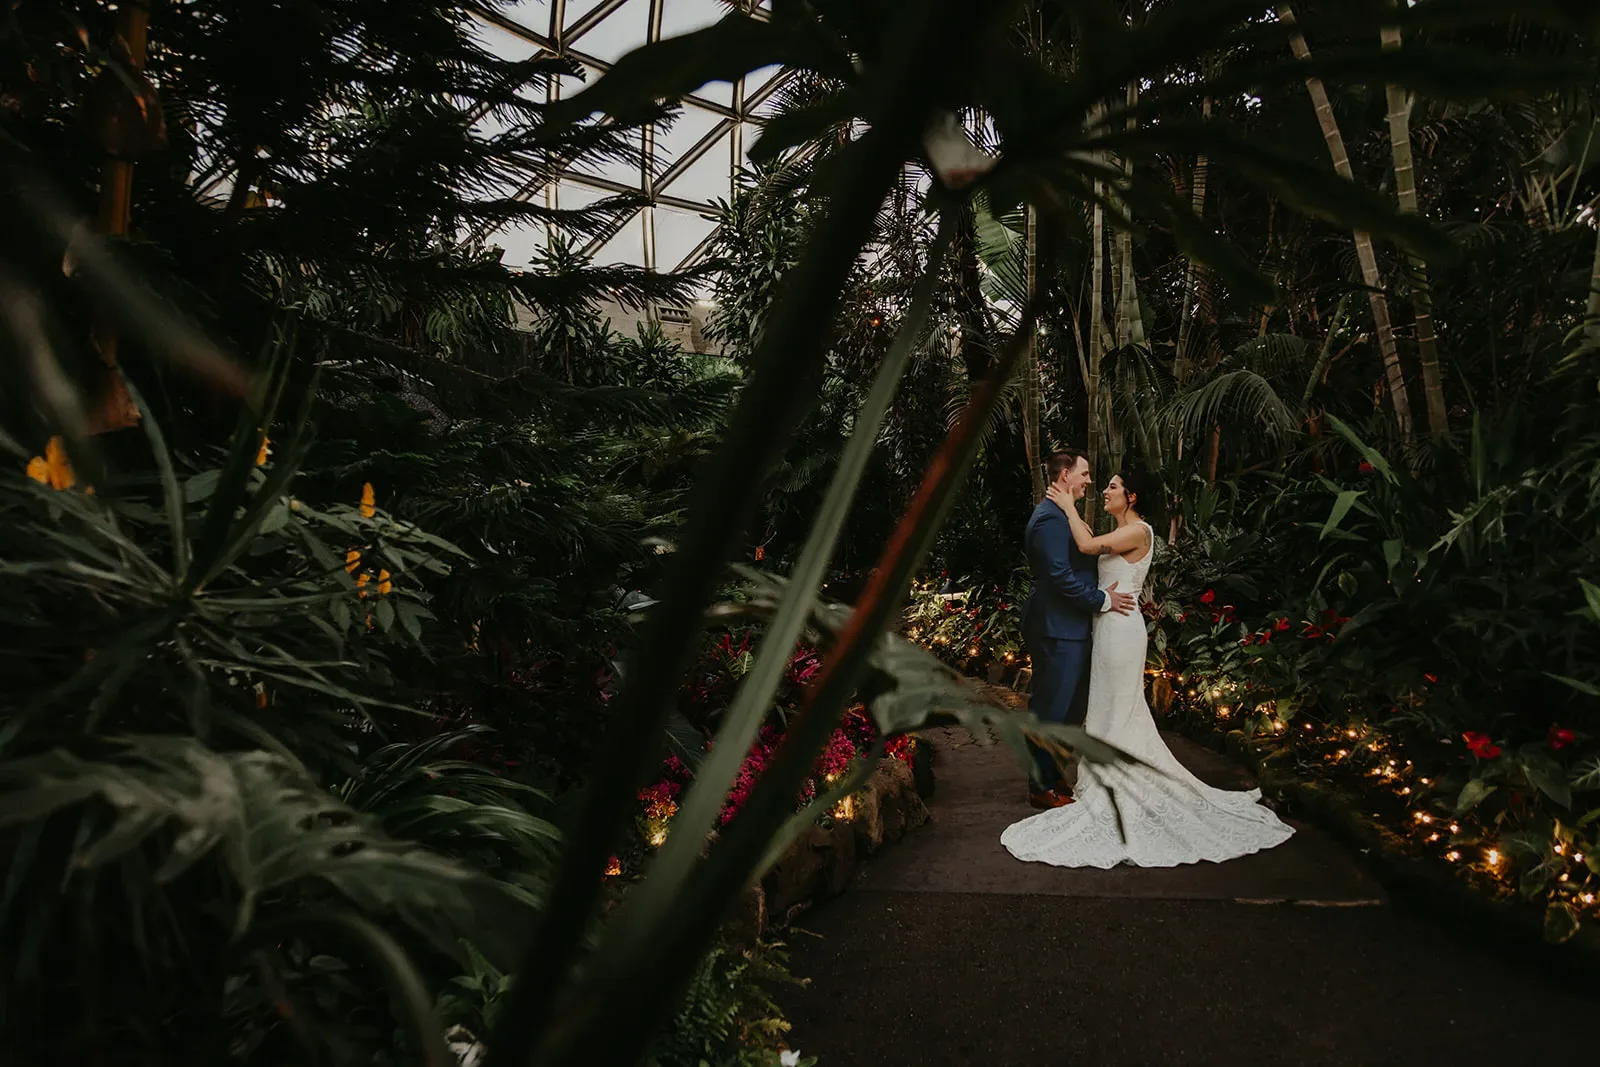 Newlyweds embracing each other in Bloedel Conservatory